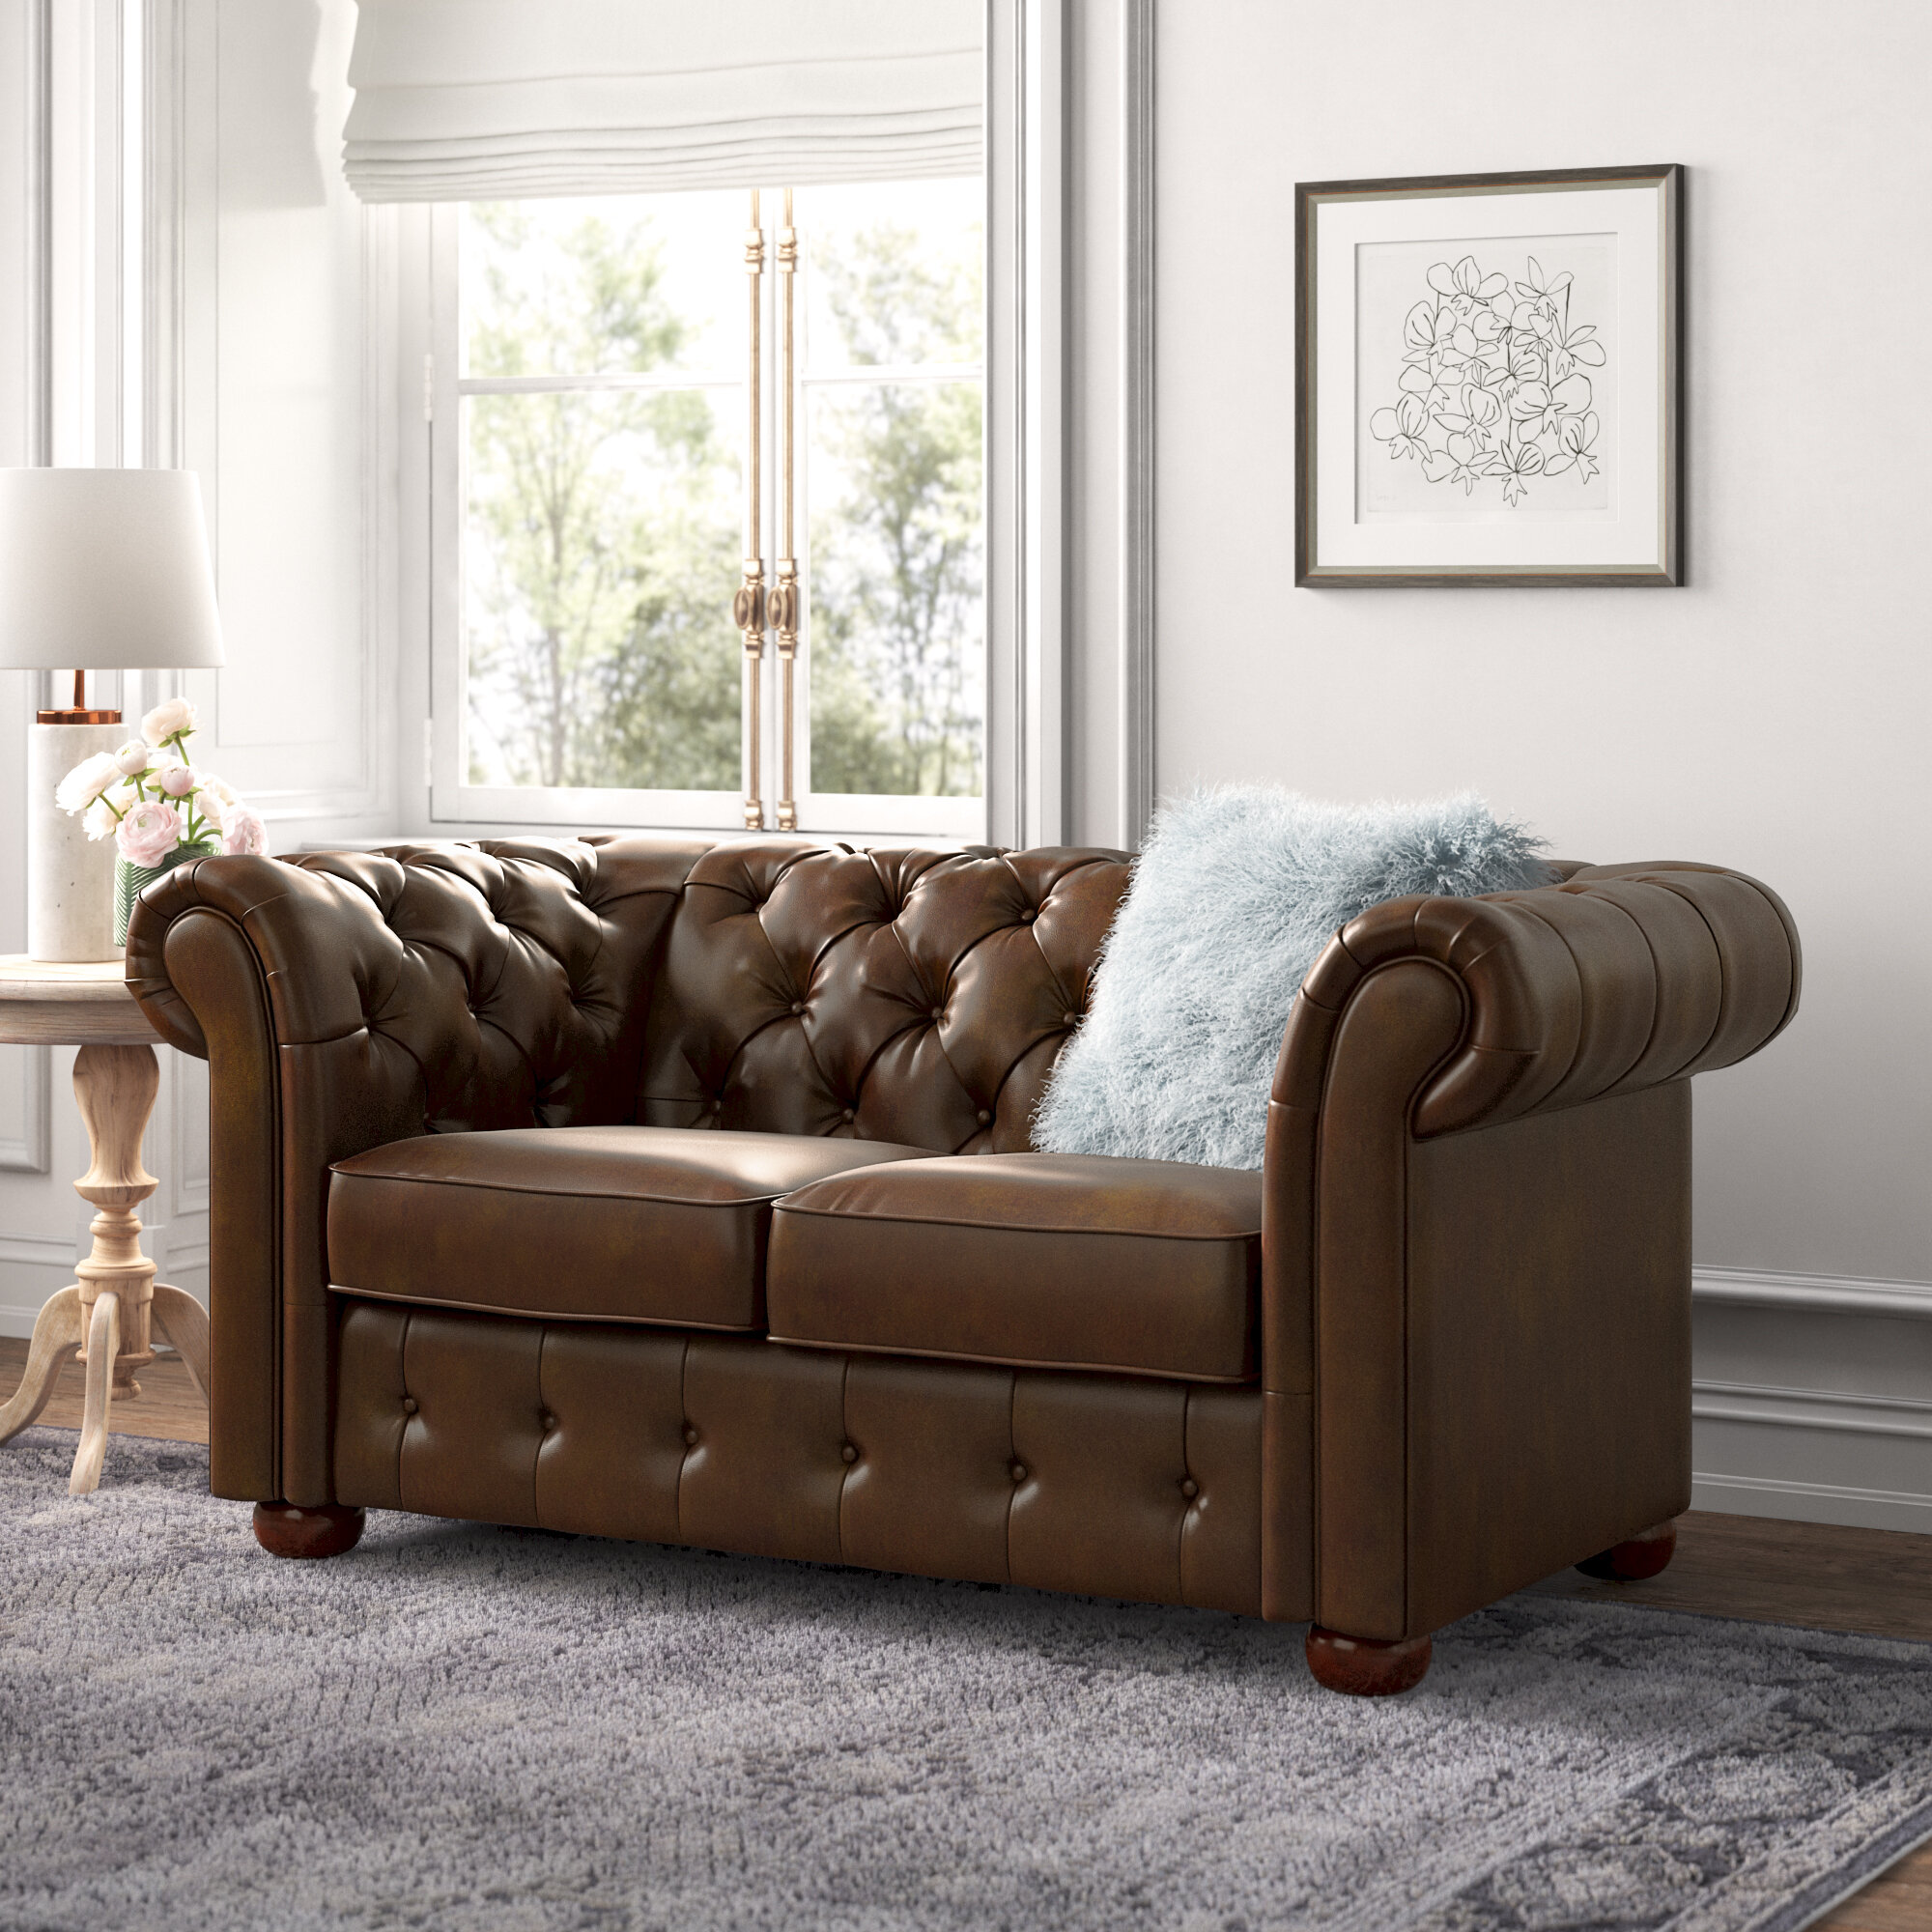 Lucious 68.4” Rolled Arm Chesterfield Loveseat